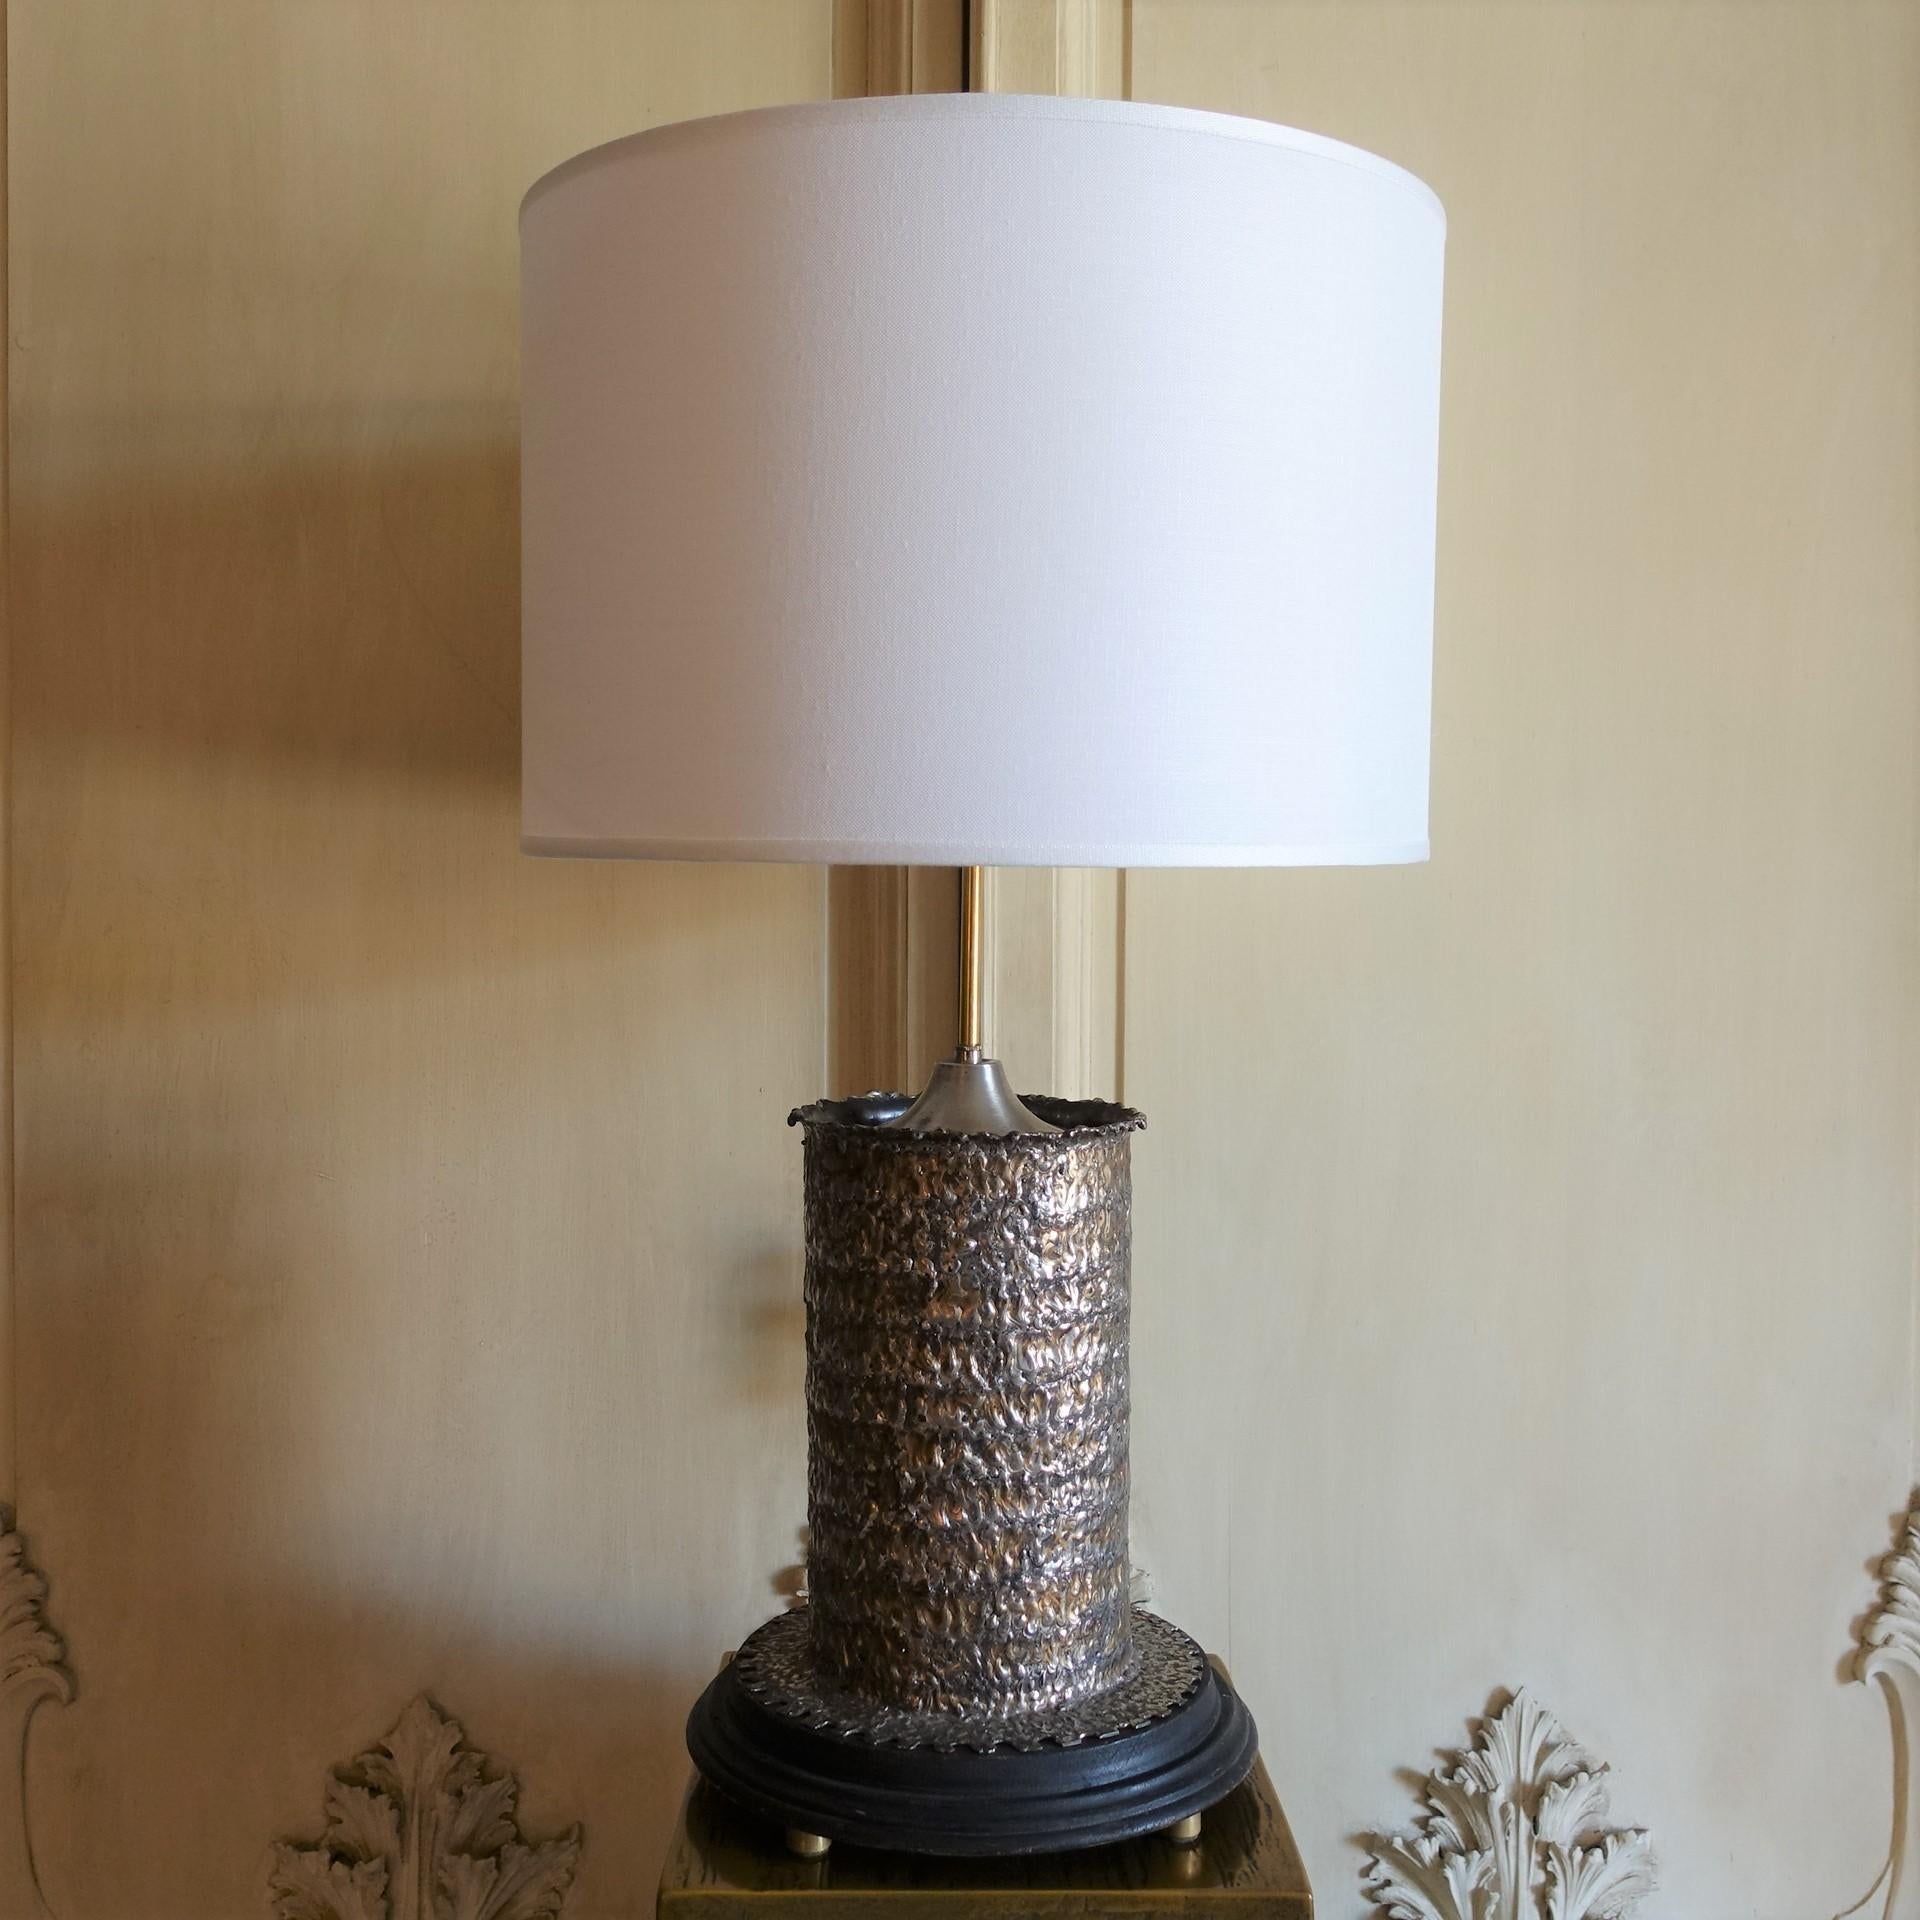 One of a kind brutalist metal cylinder table lamp, wood base, steel and brass details, vintage patina, base measures cm Diameter 30xh.56, lampshade cm Diameter 45xh.30, total height cm78, Italy 1970's circa.